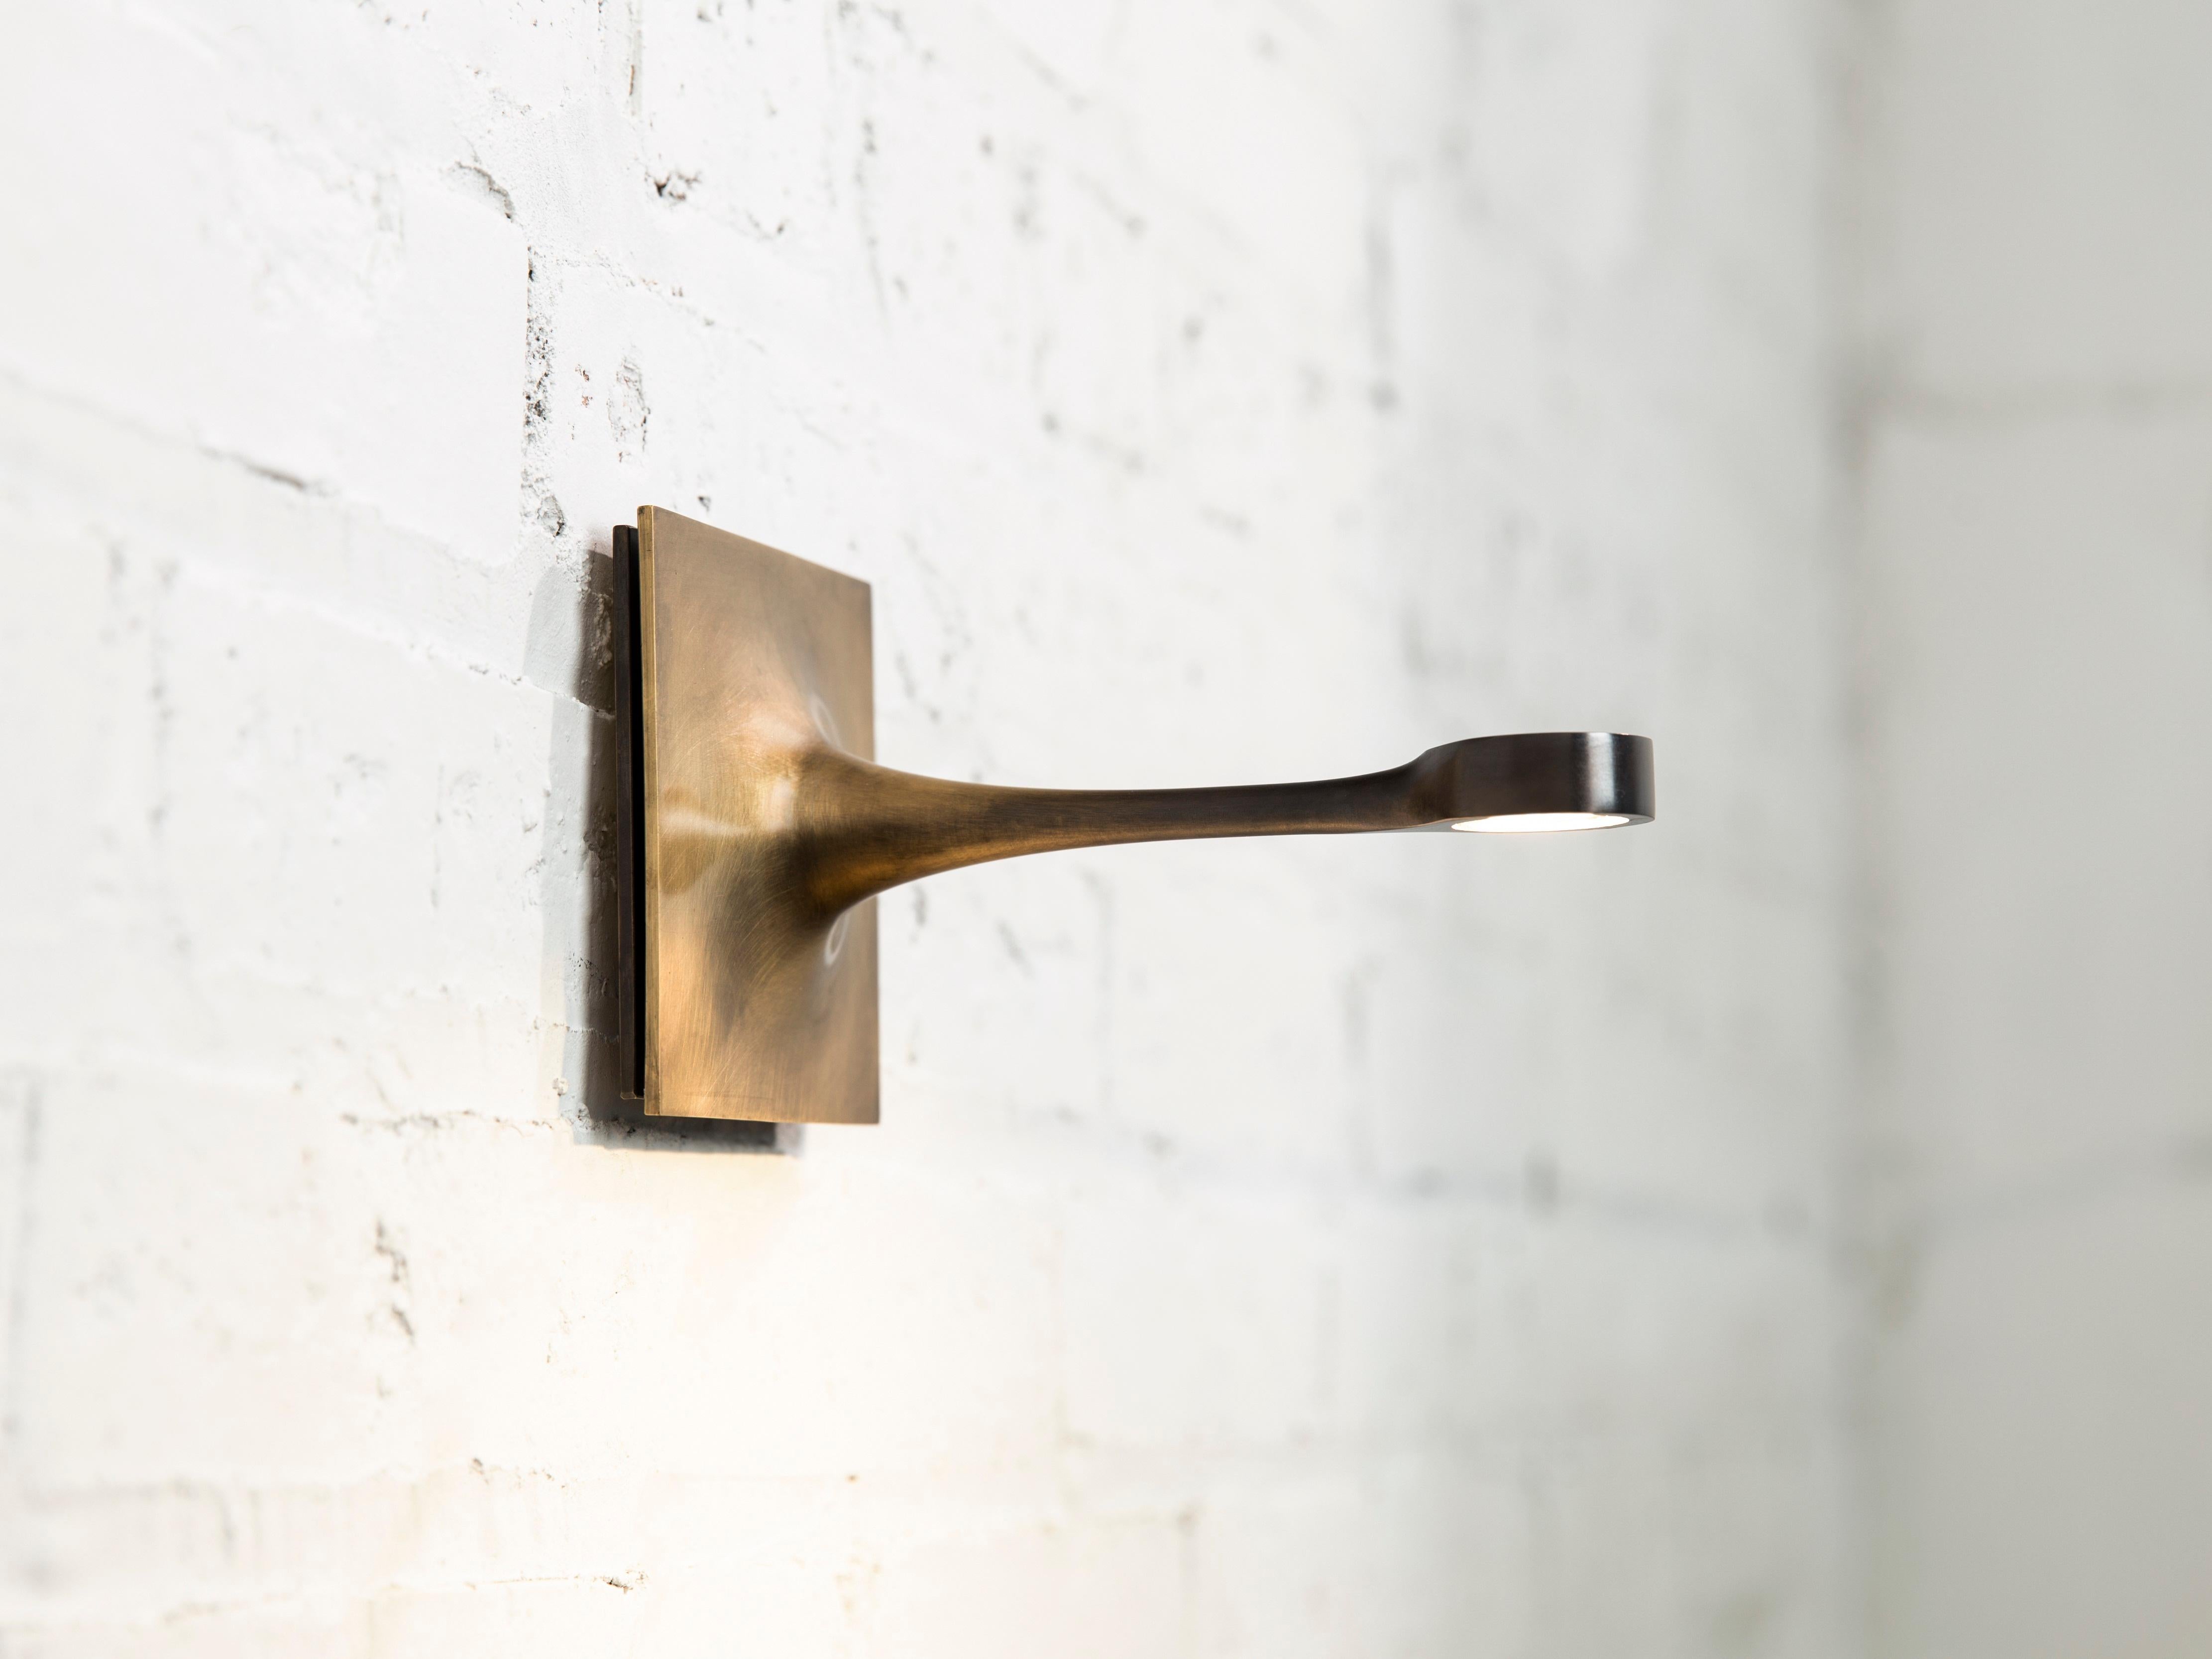 Wall sconce by Gentner Design
Dimensions: D 10 x W 16.5 x H 10 cm
Materials: brass

All our lamps can be wired according to each country. If sold to the USA it will be wired for the USA for instance.

I wanted to create the appearance of